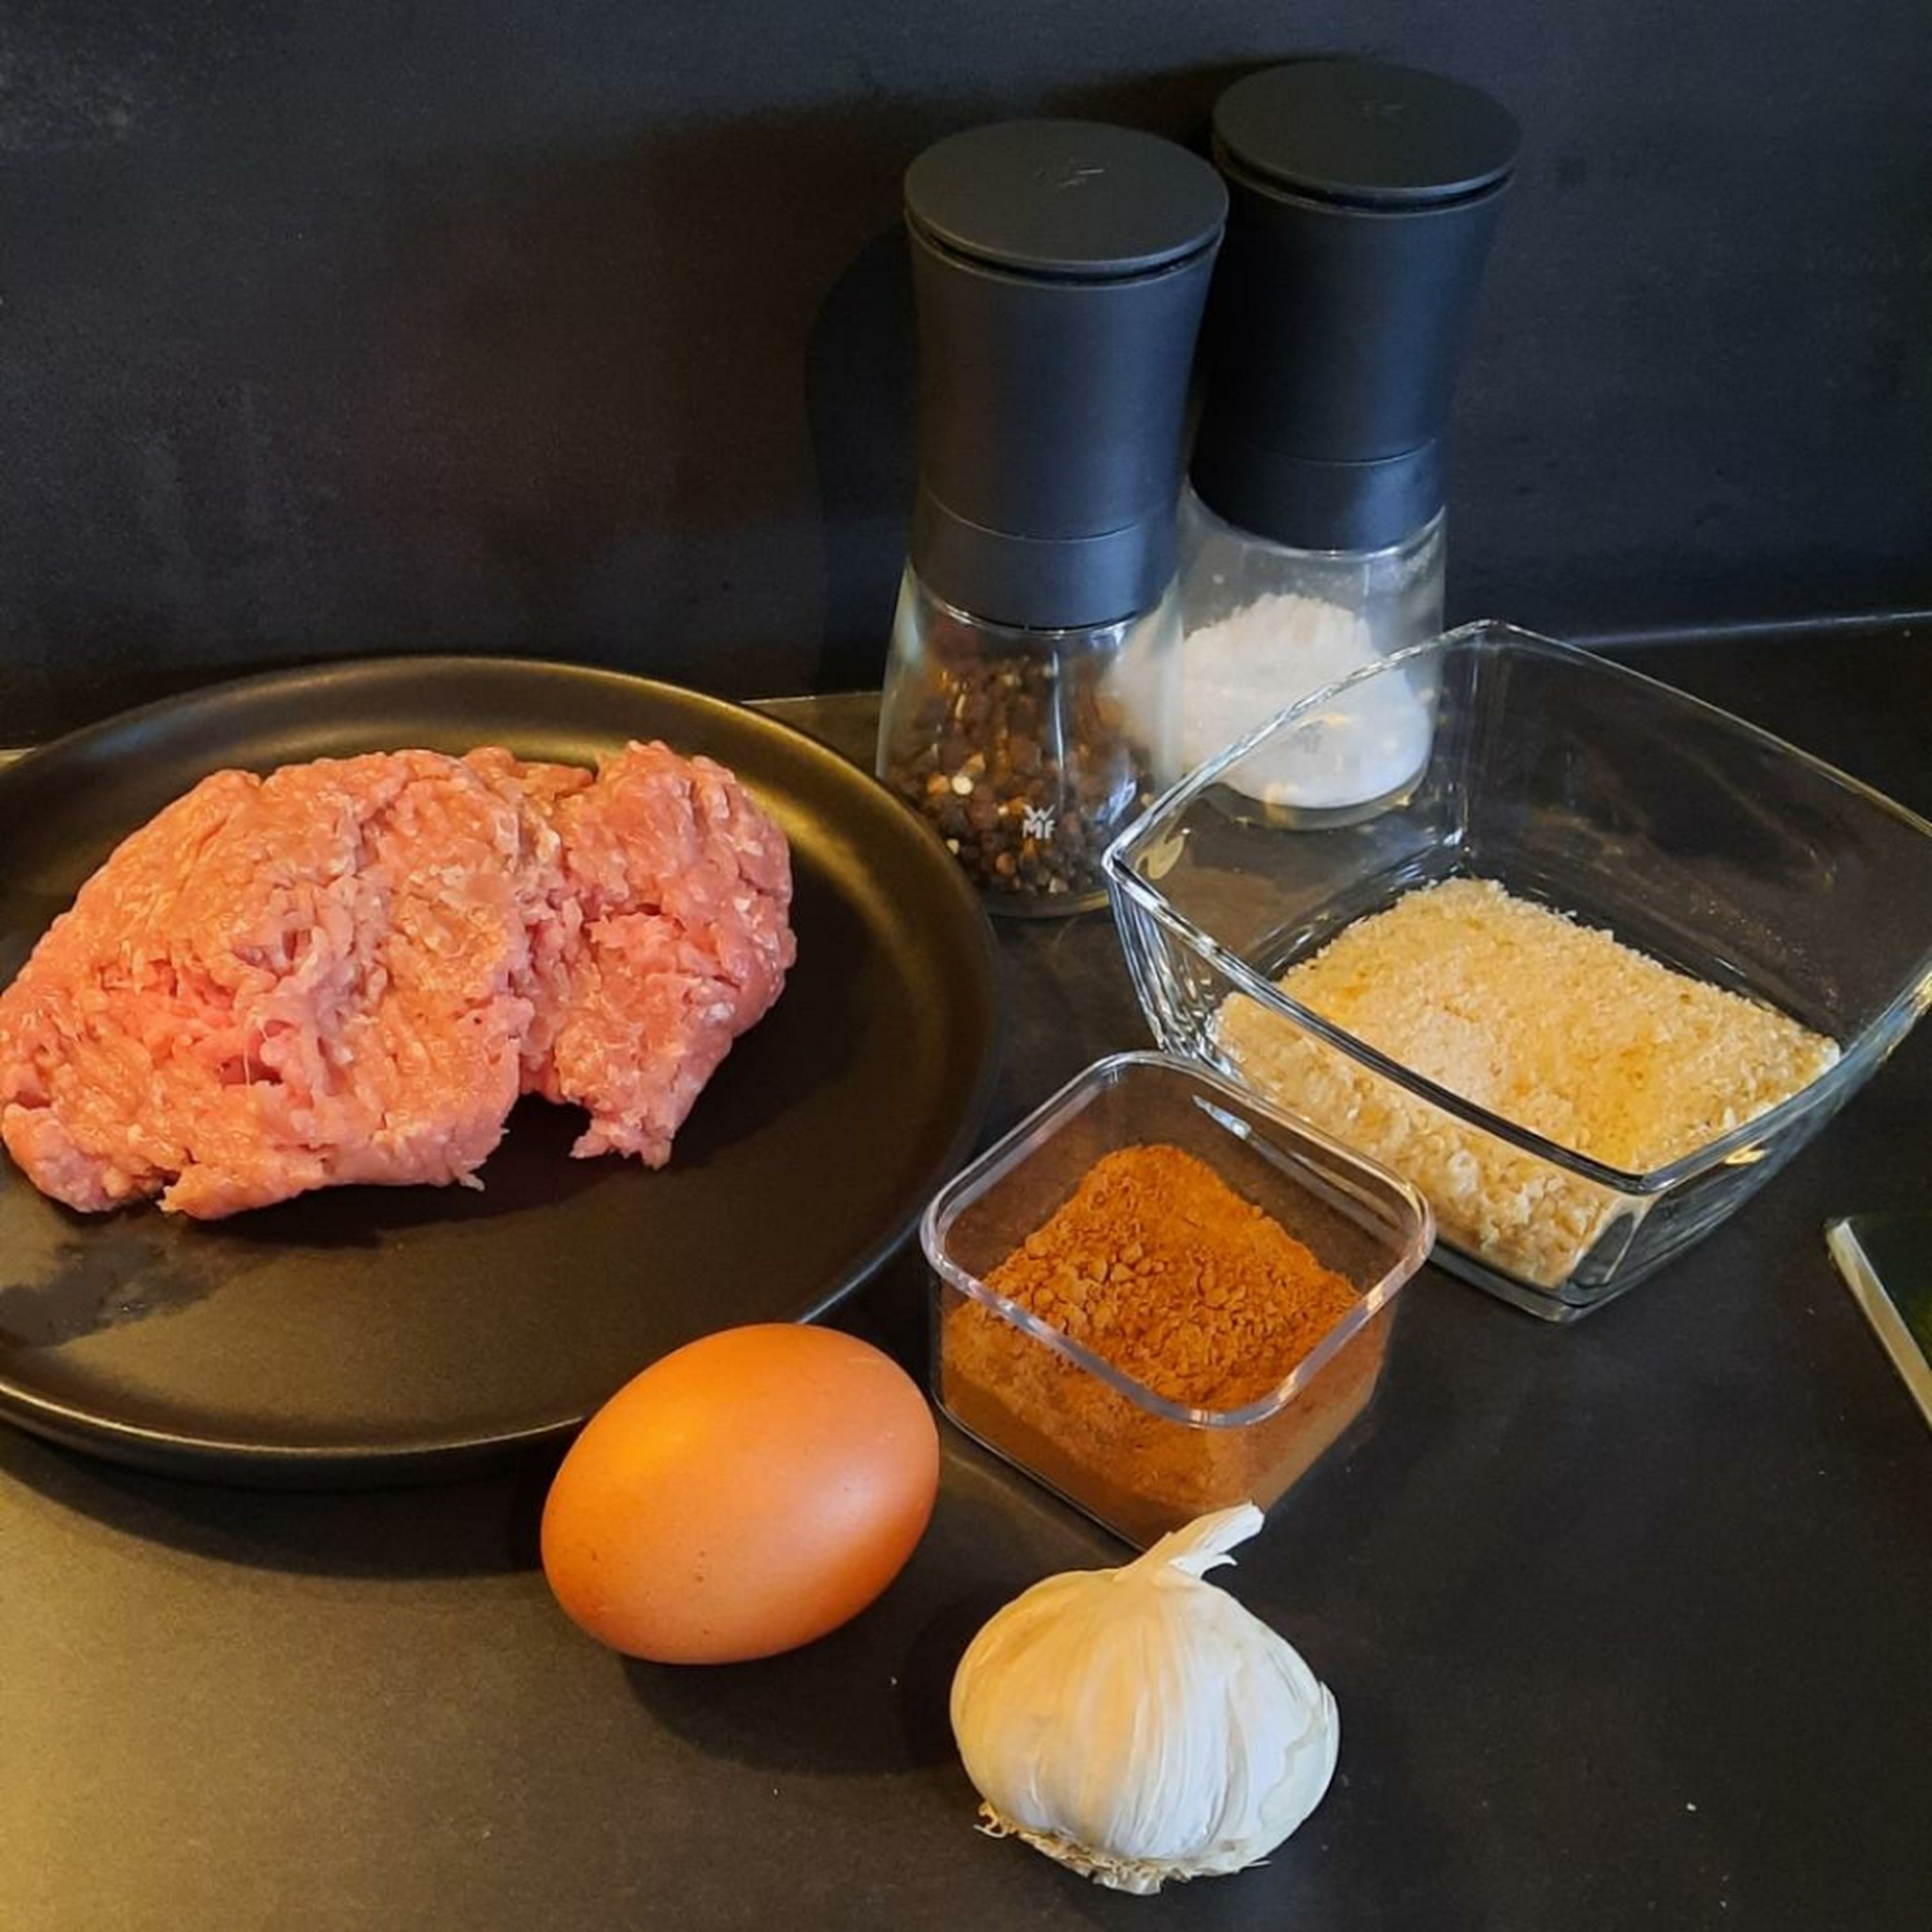 For the meatballs, combine ground beef, egg, breadcrumbs, nutmeg, and cinnamon in a bowl. Press garlic into the mixture and season with salt and pepper.